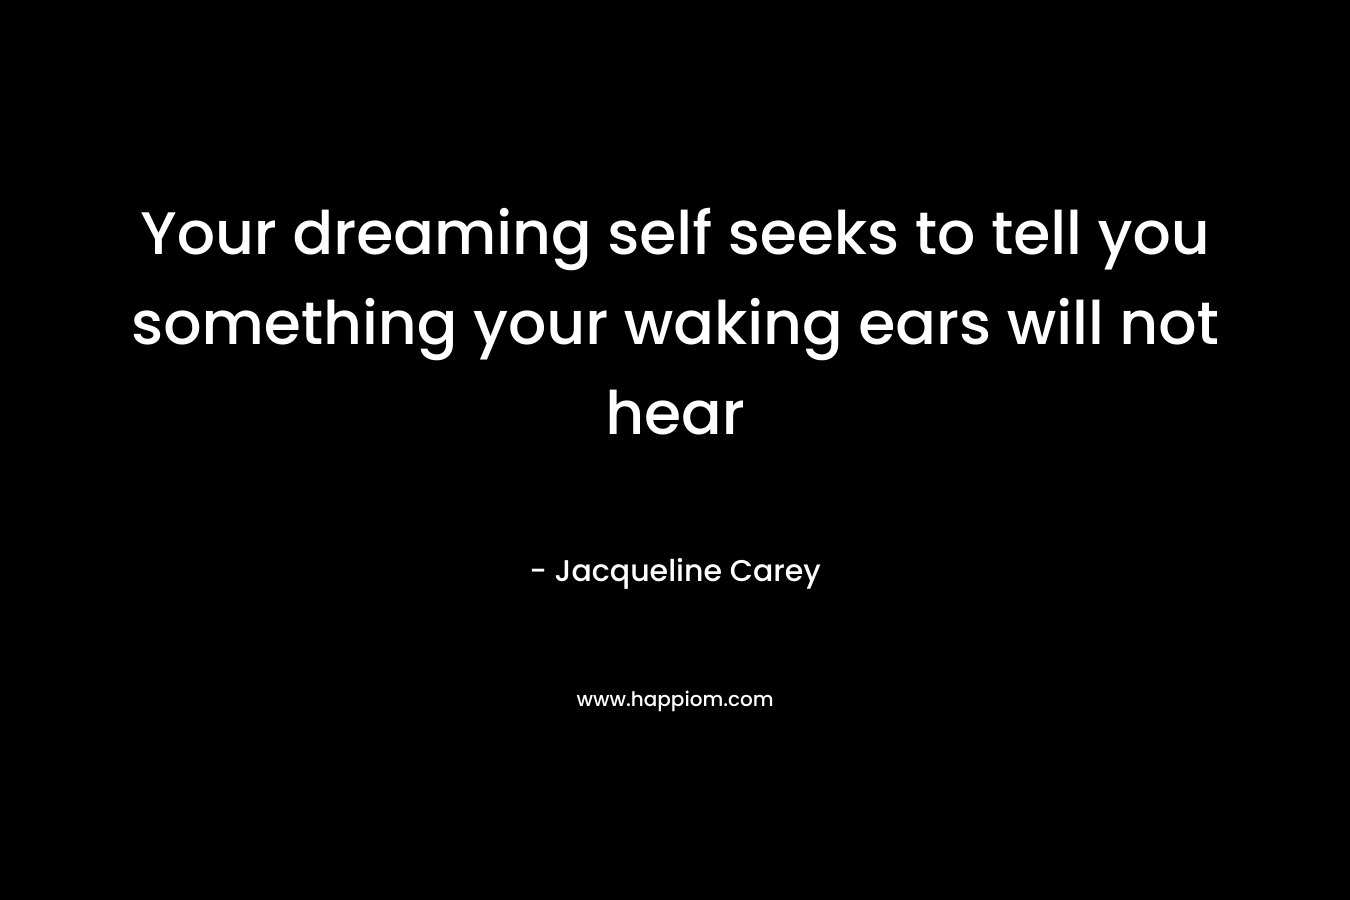 Your dreaming self seeks to tell you something your waking ears will not hear